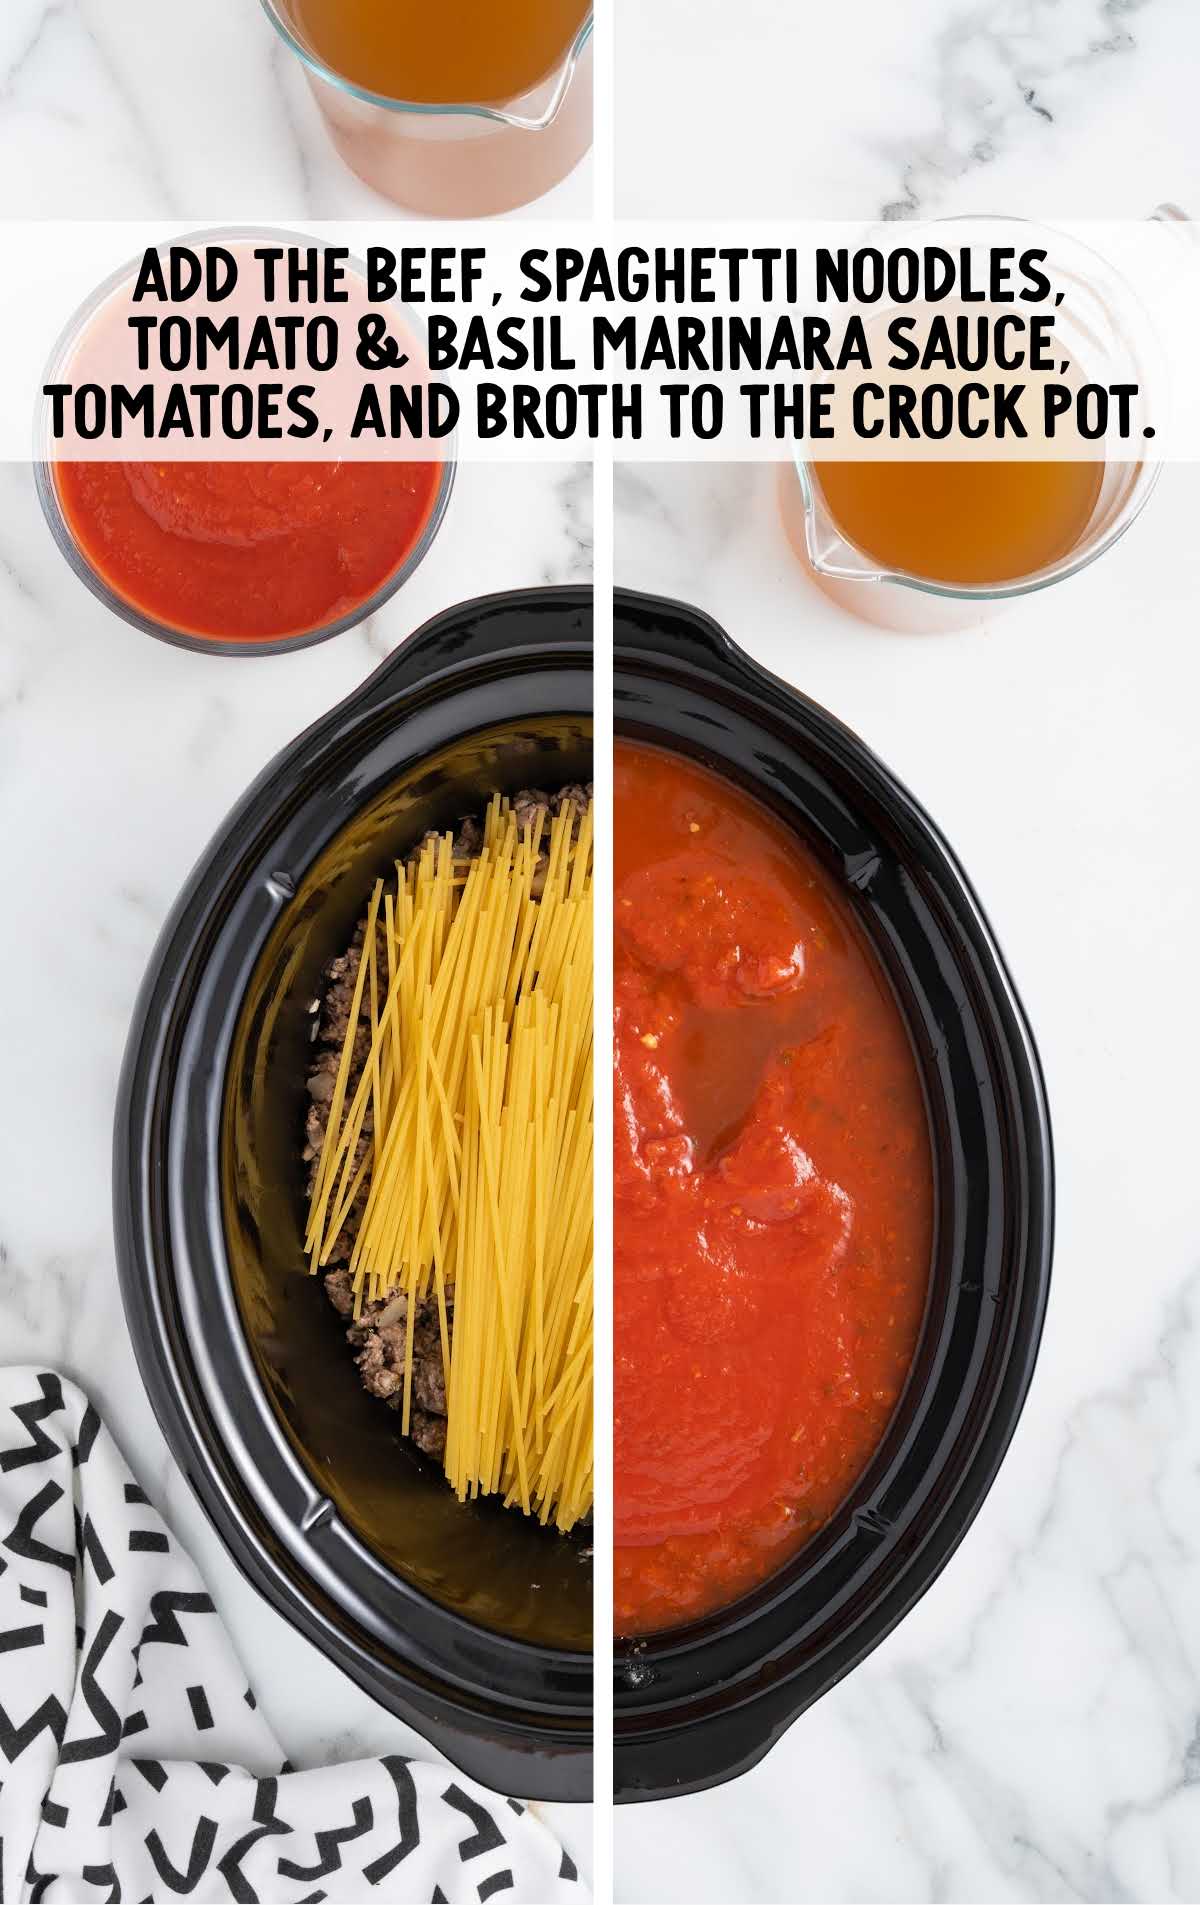 ground beef, dry spaghetti noodles, tomato & basil marinara sauce, crushed tomatoes, and chicken broth added to a crockpot